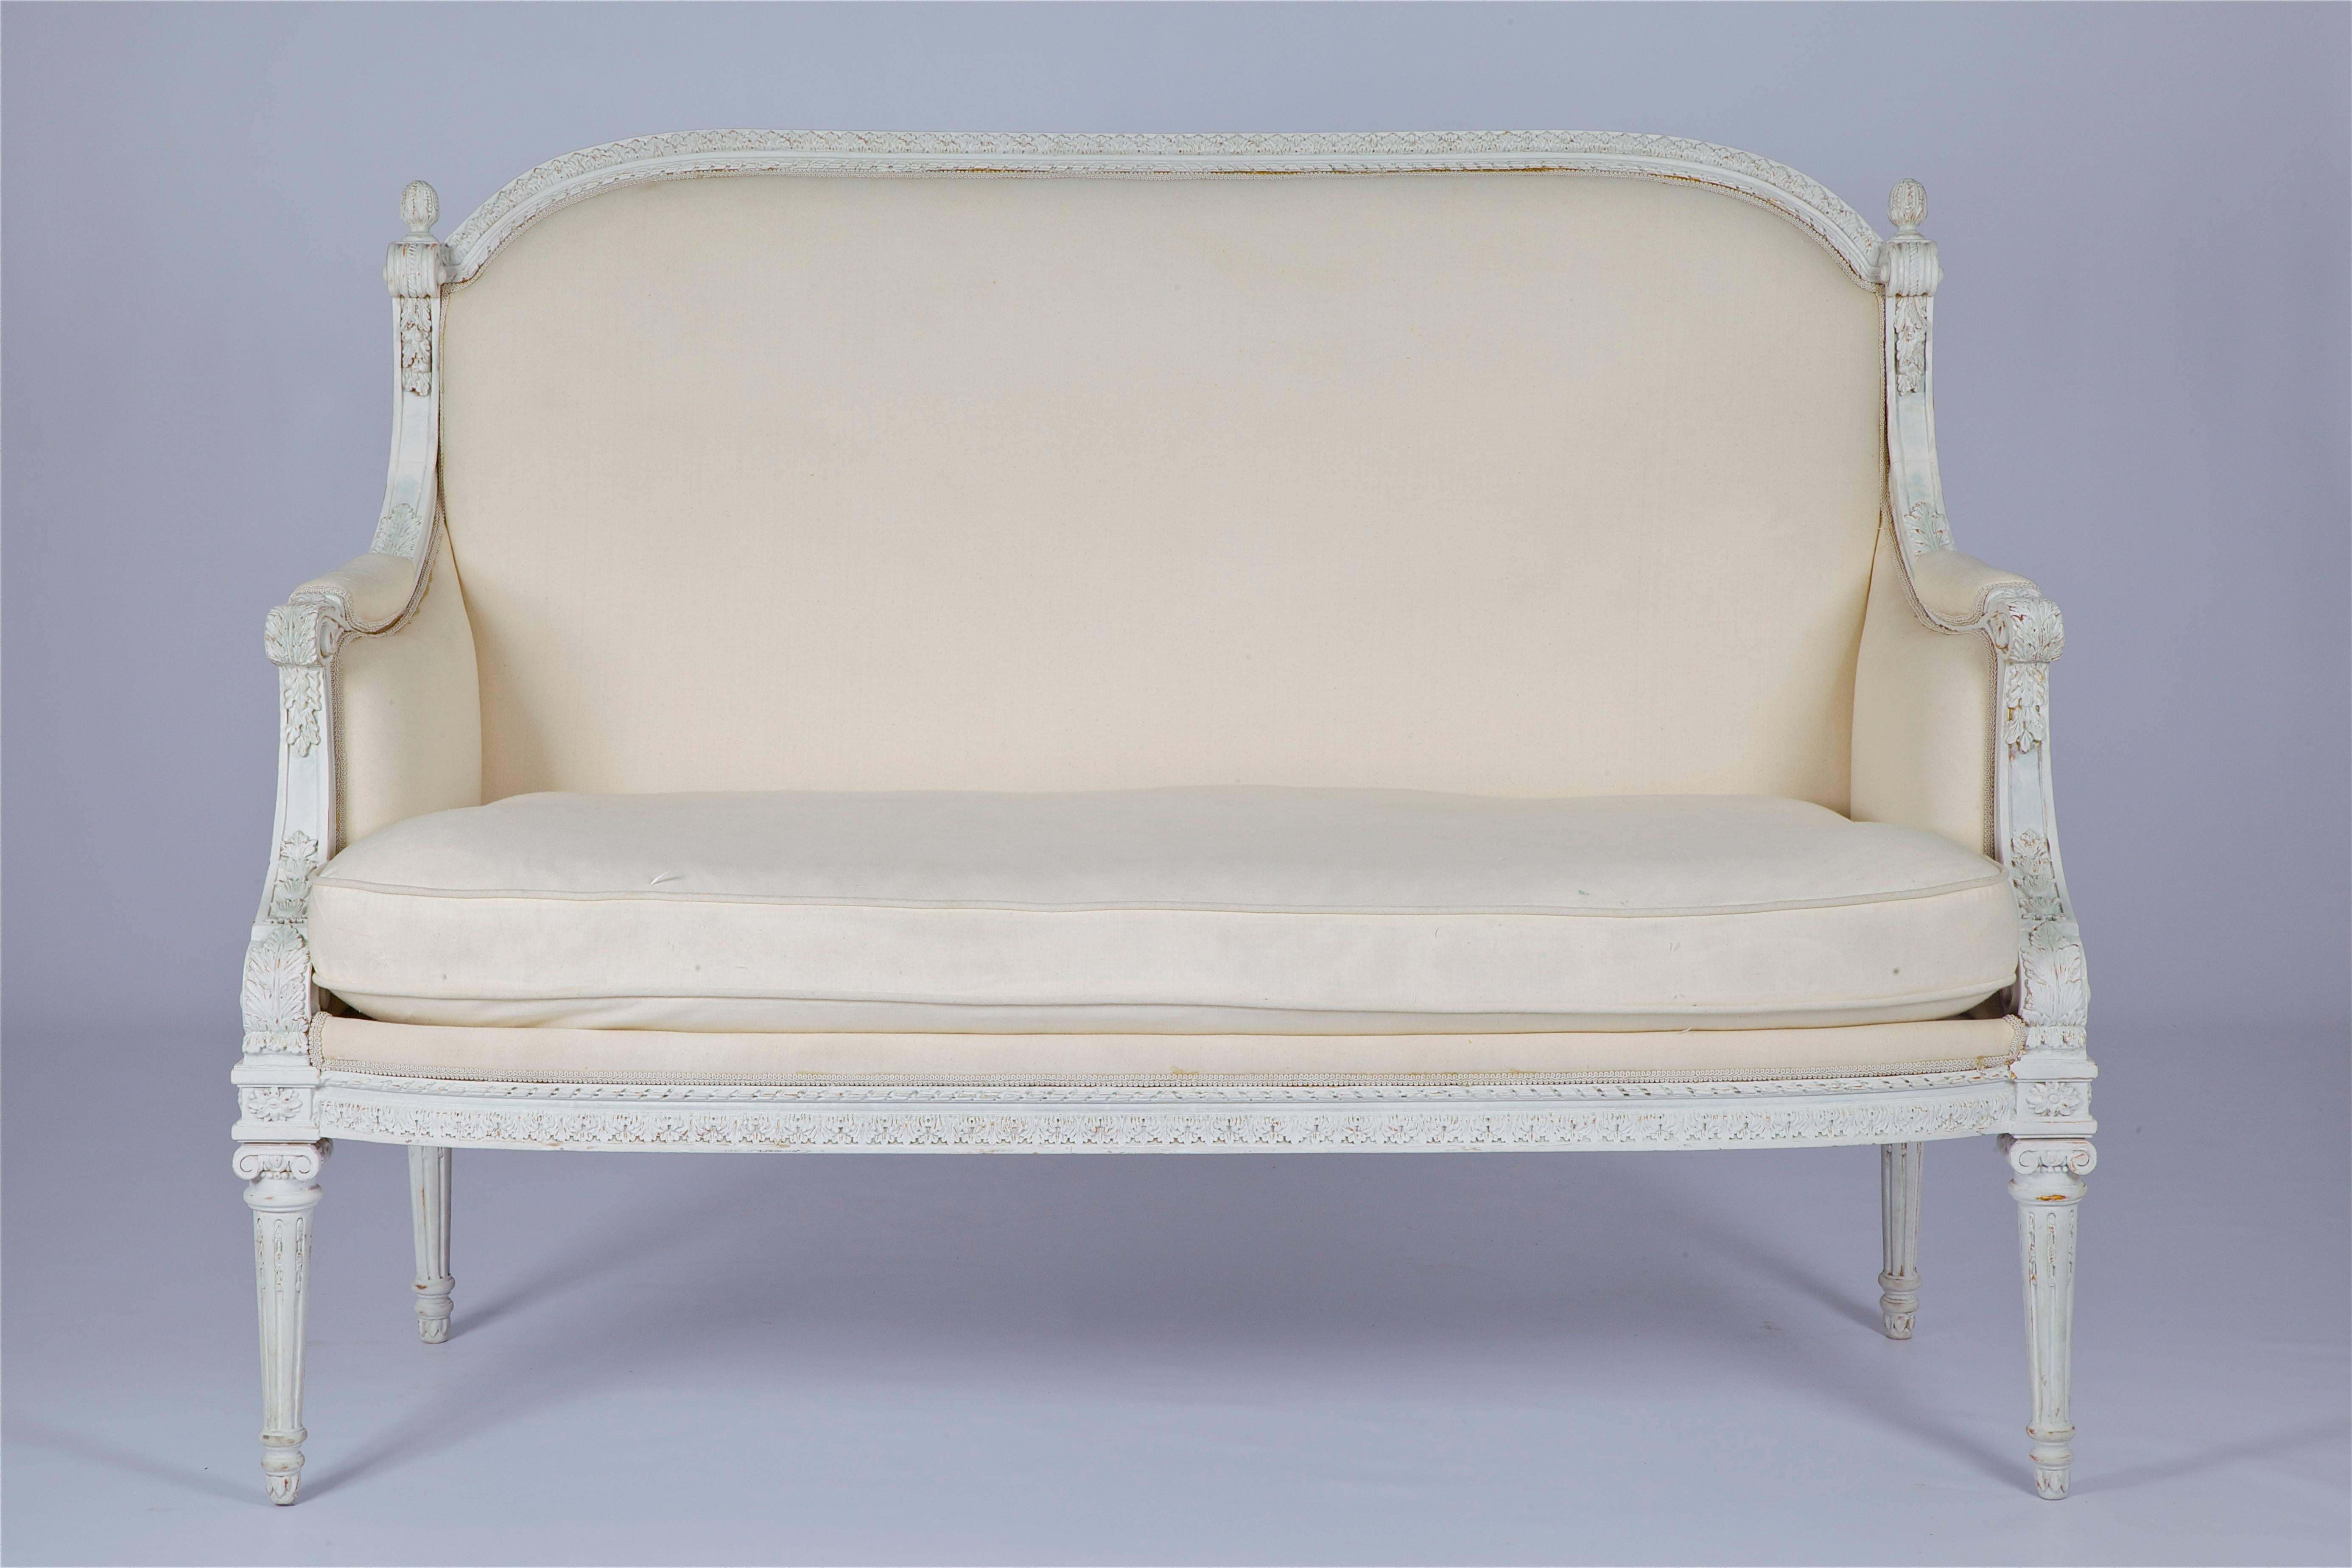 French Louis XVI style two-seat sofa, hand-carved in solid wood, upholstered with a white Calico and painted in an aged white gesso.